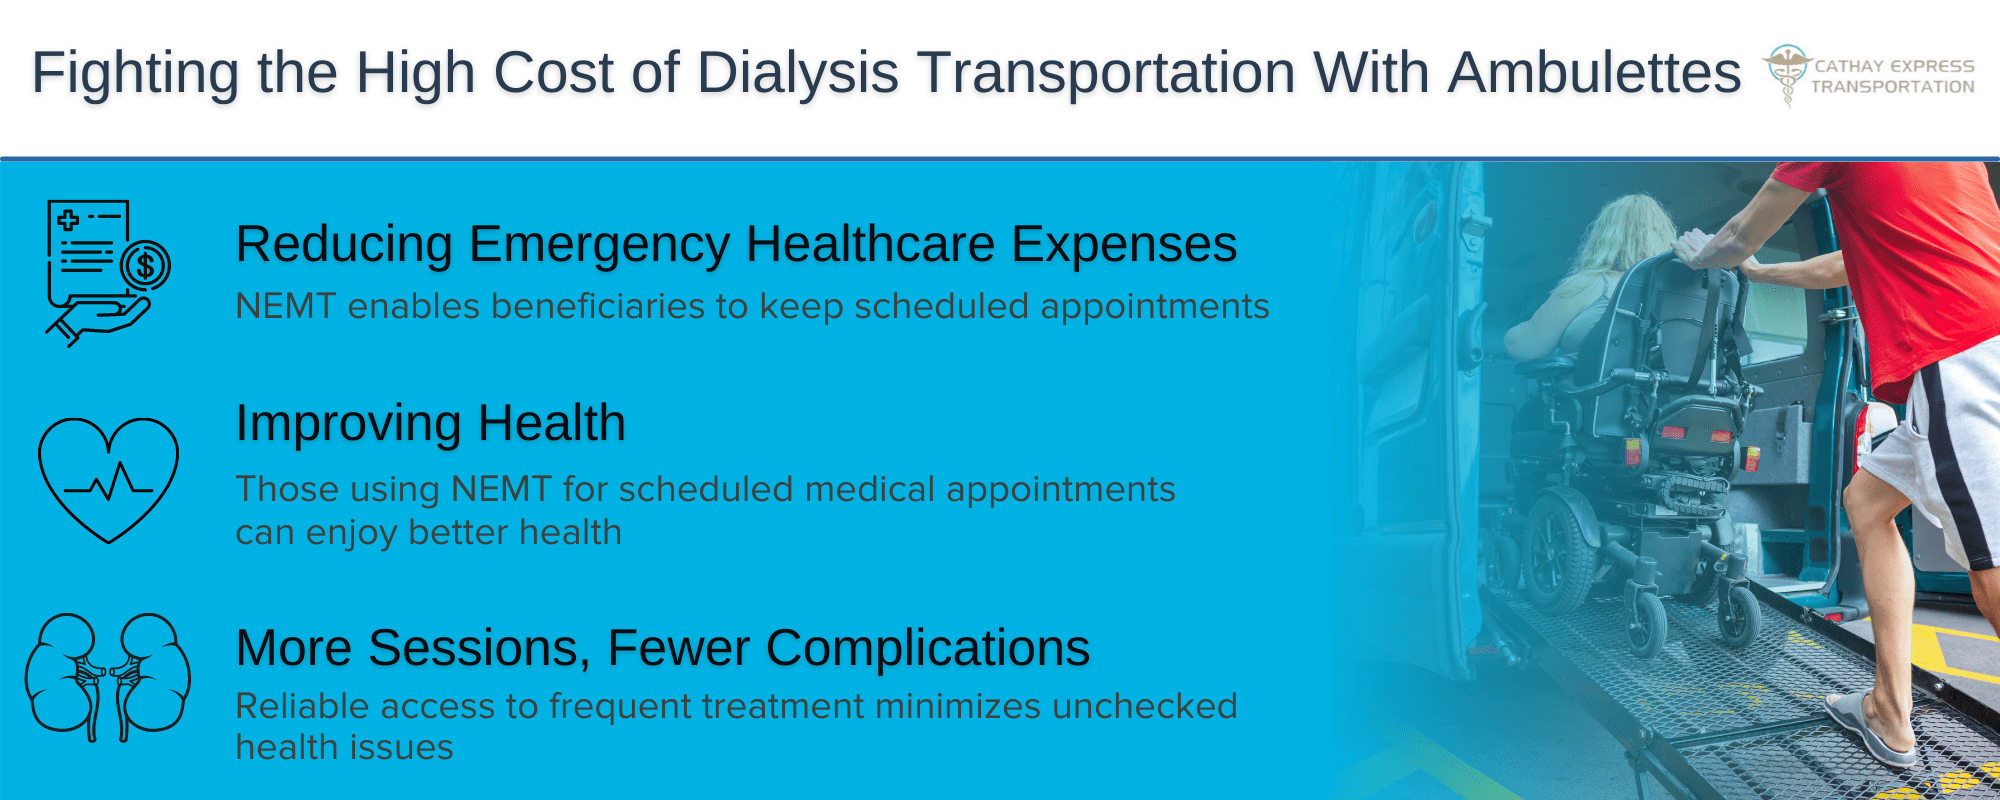 Infographic outlining how ambulettes can be an effective means of transportation for dialysis patients